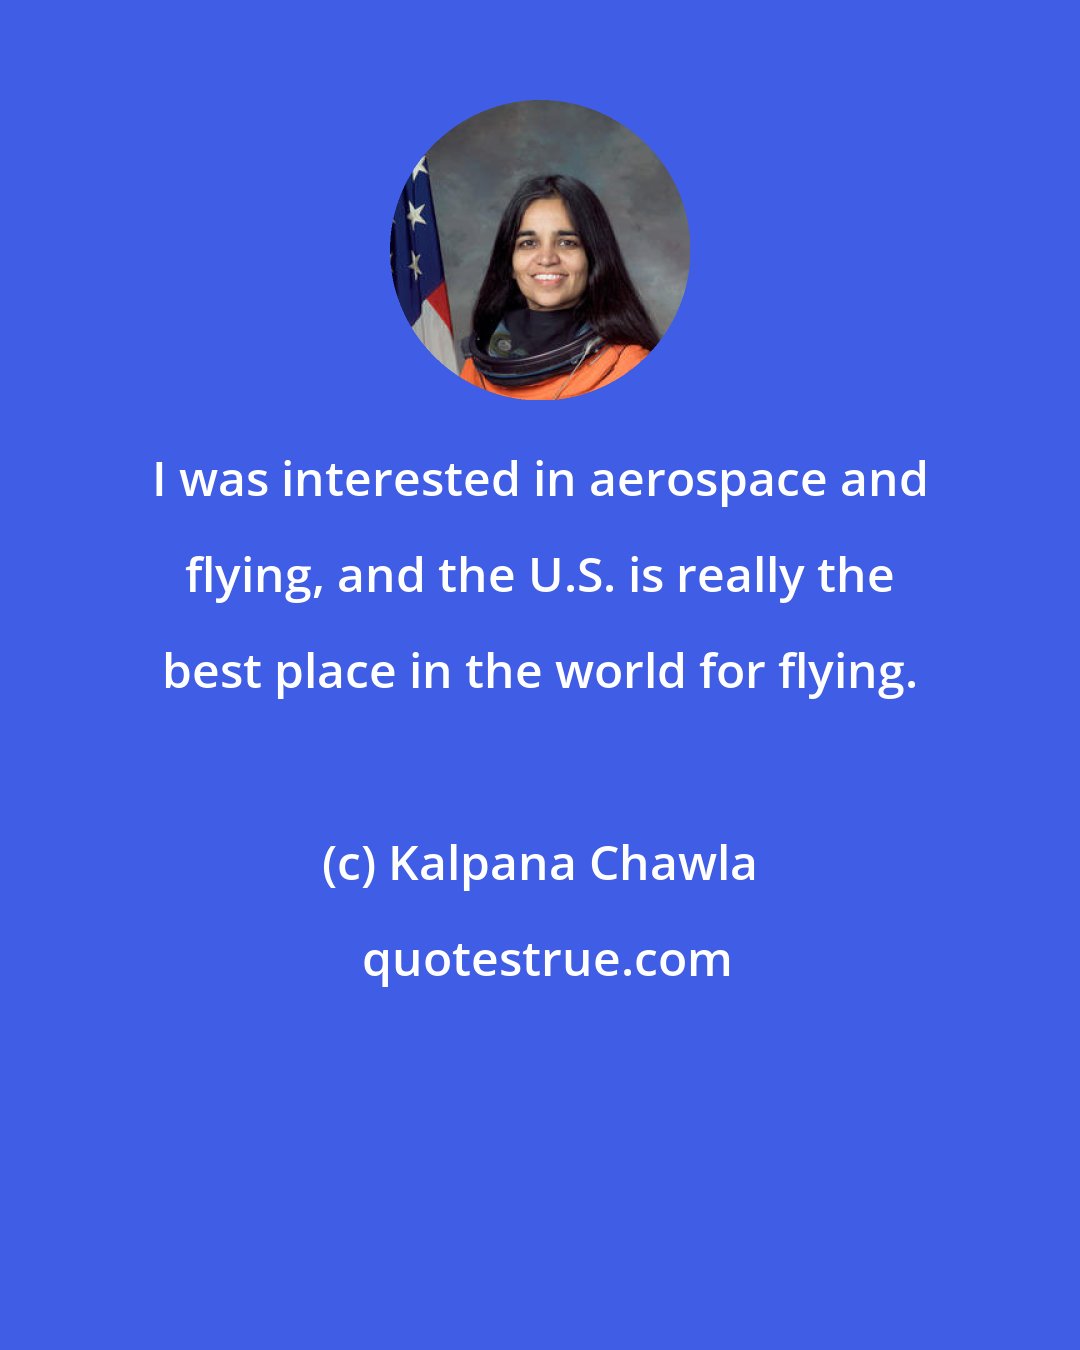 Kalpana Chawla: I was interested in aerospace and flying, and the U.S. is really the best place in the world for flying.